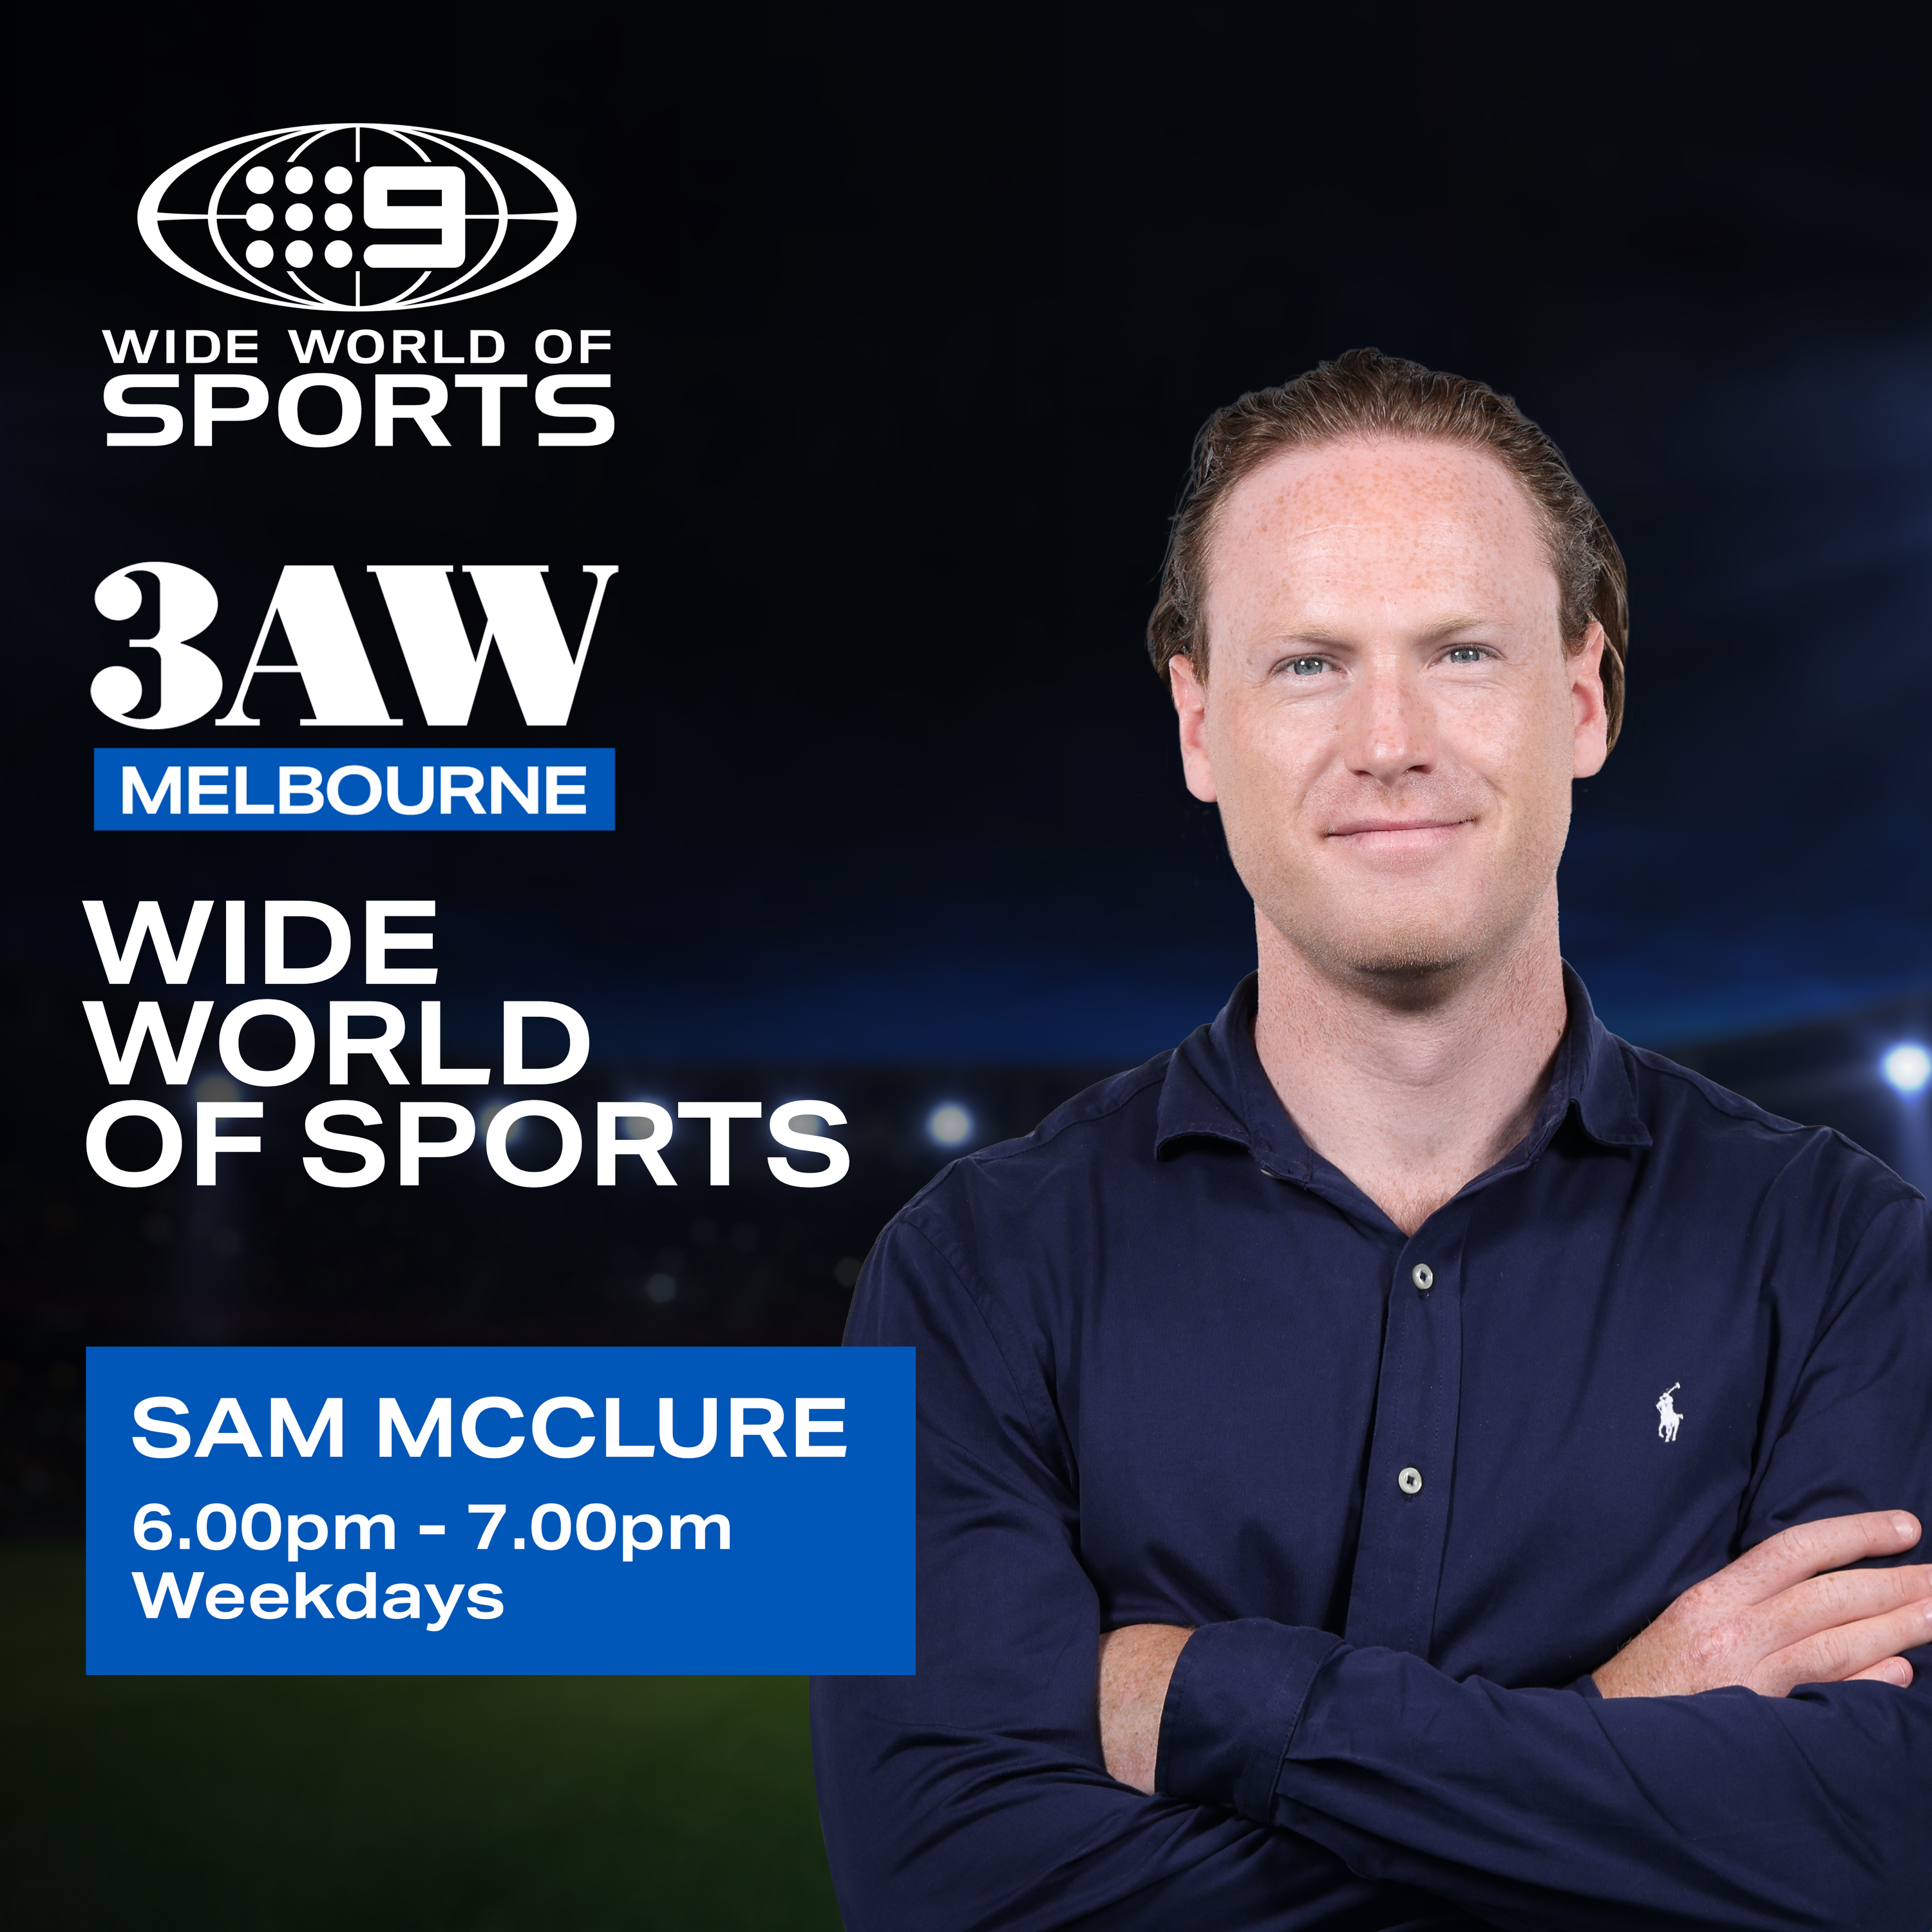 West Coast is "asleep at the wheel" according to Sam McClure